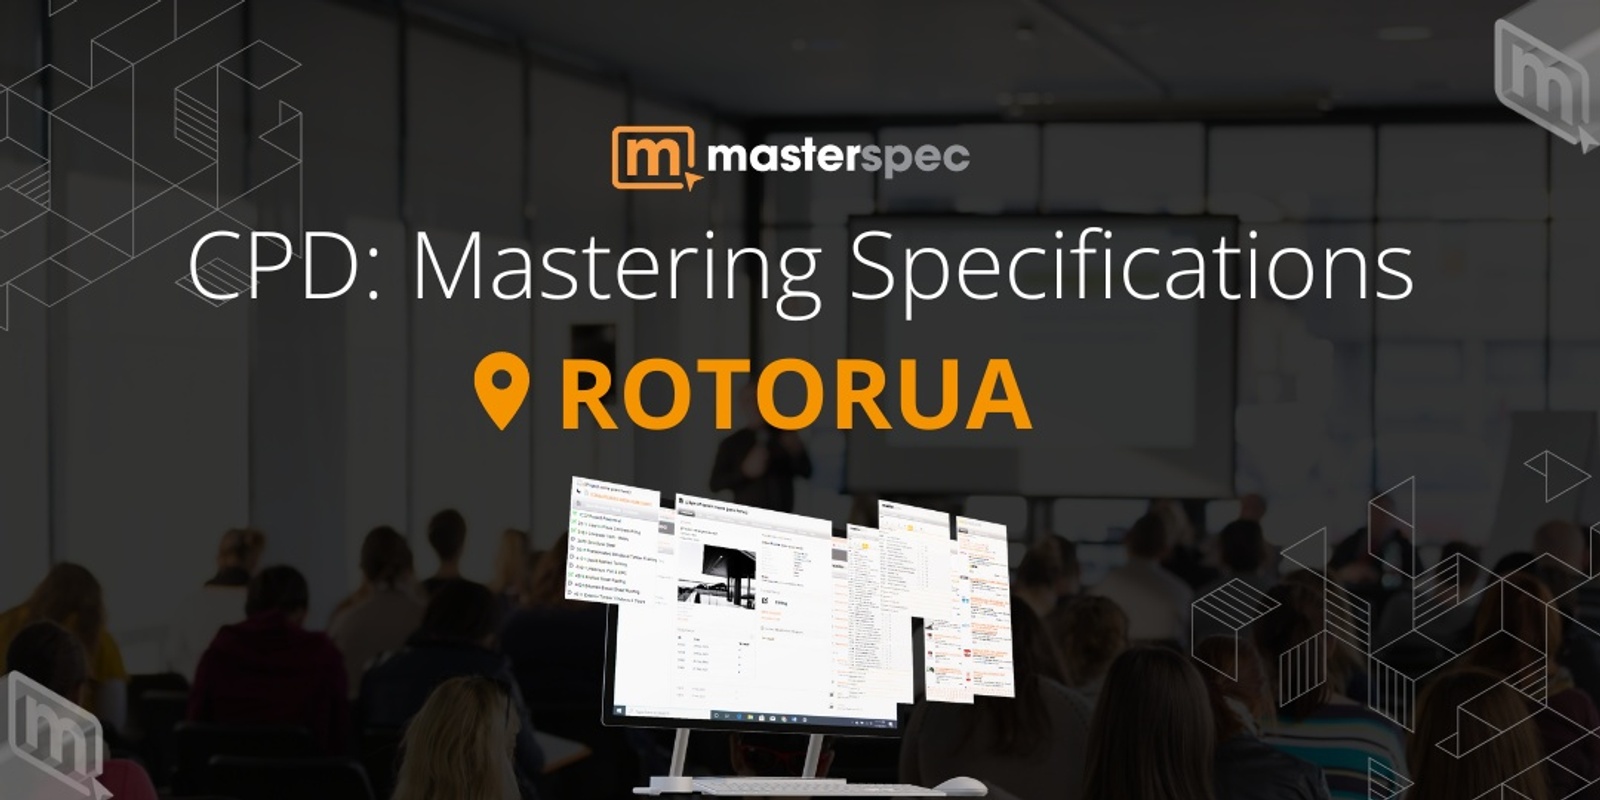 Banner image for CPD: Mastering Masterspec Specifications ROTORUA | ⭐ 20 CPD Points